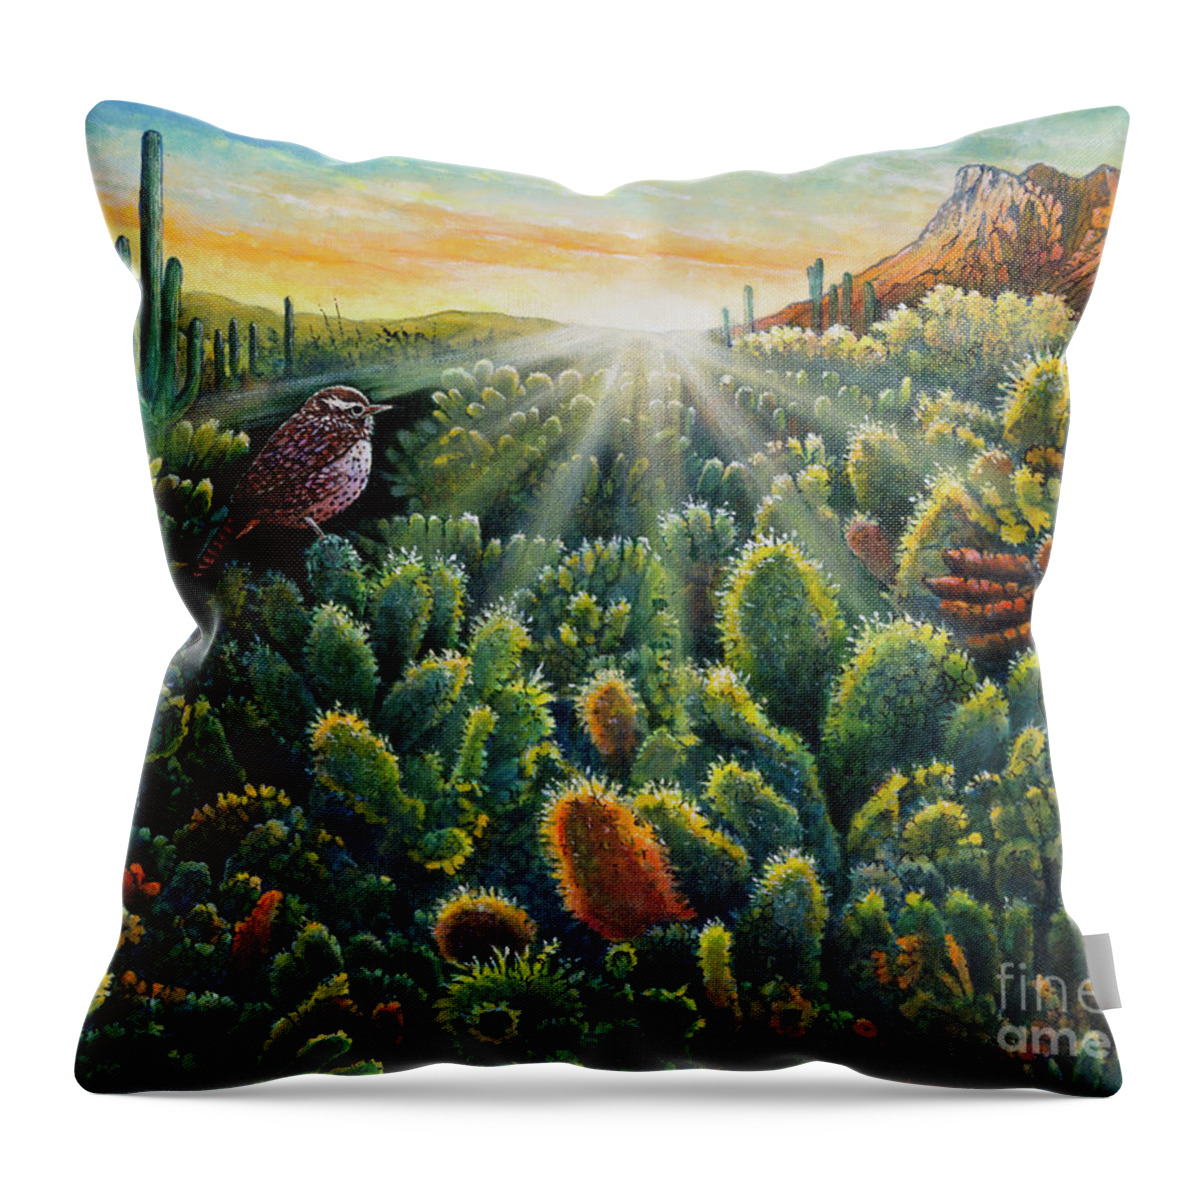 Cactus Wren Throw Pillow featuring the painting Cactus Wren by Michael Frank